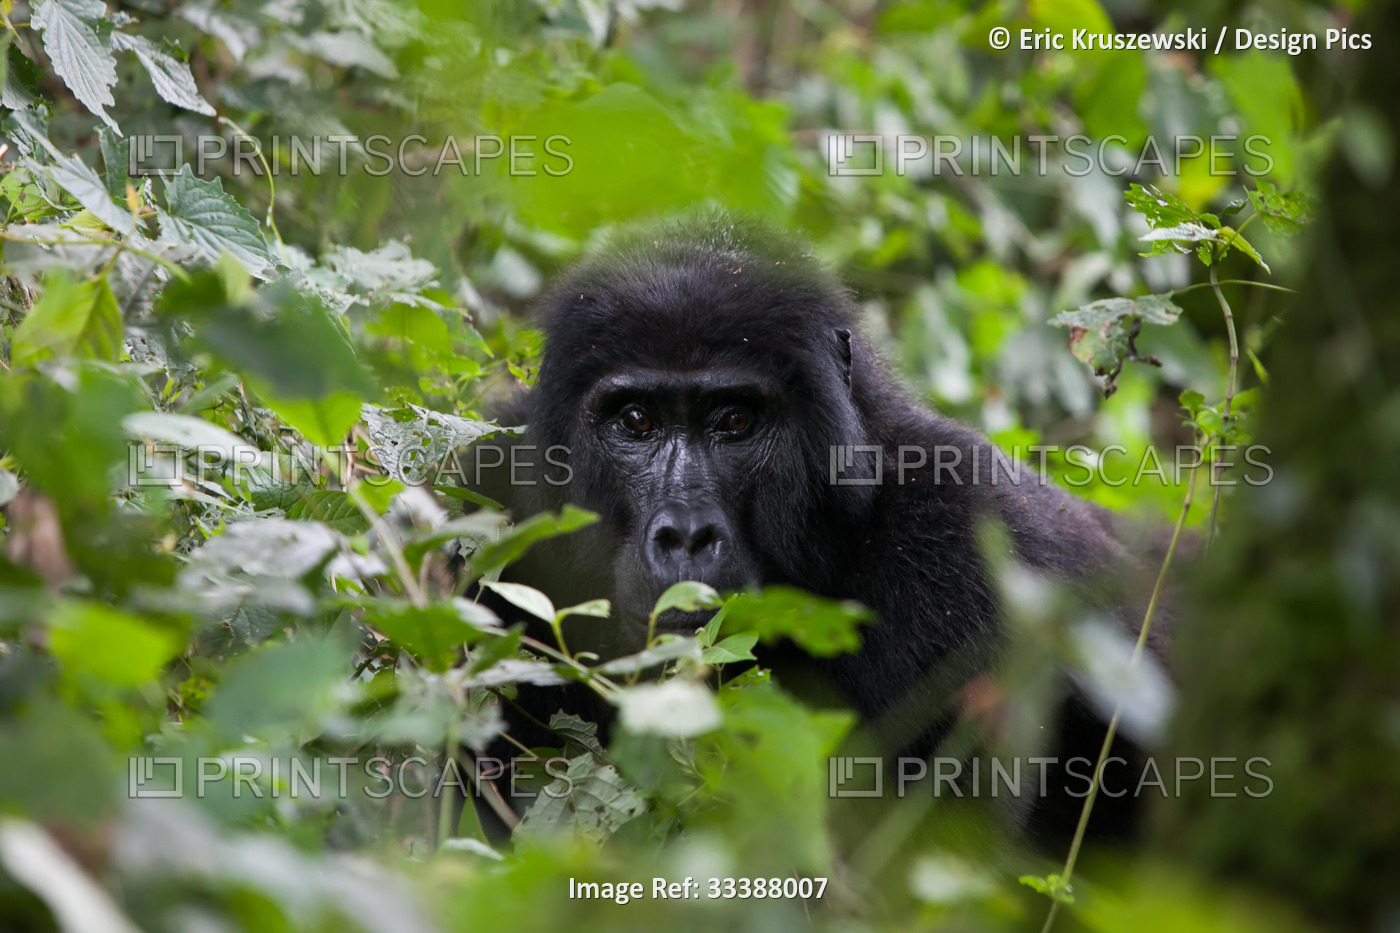 An adult gorilla rests on the ground in dense vegetation of the impenetrable ...